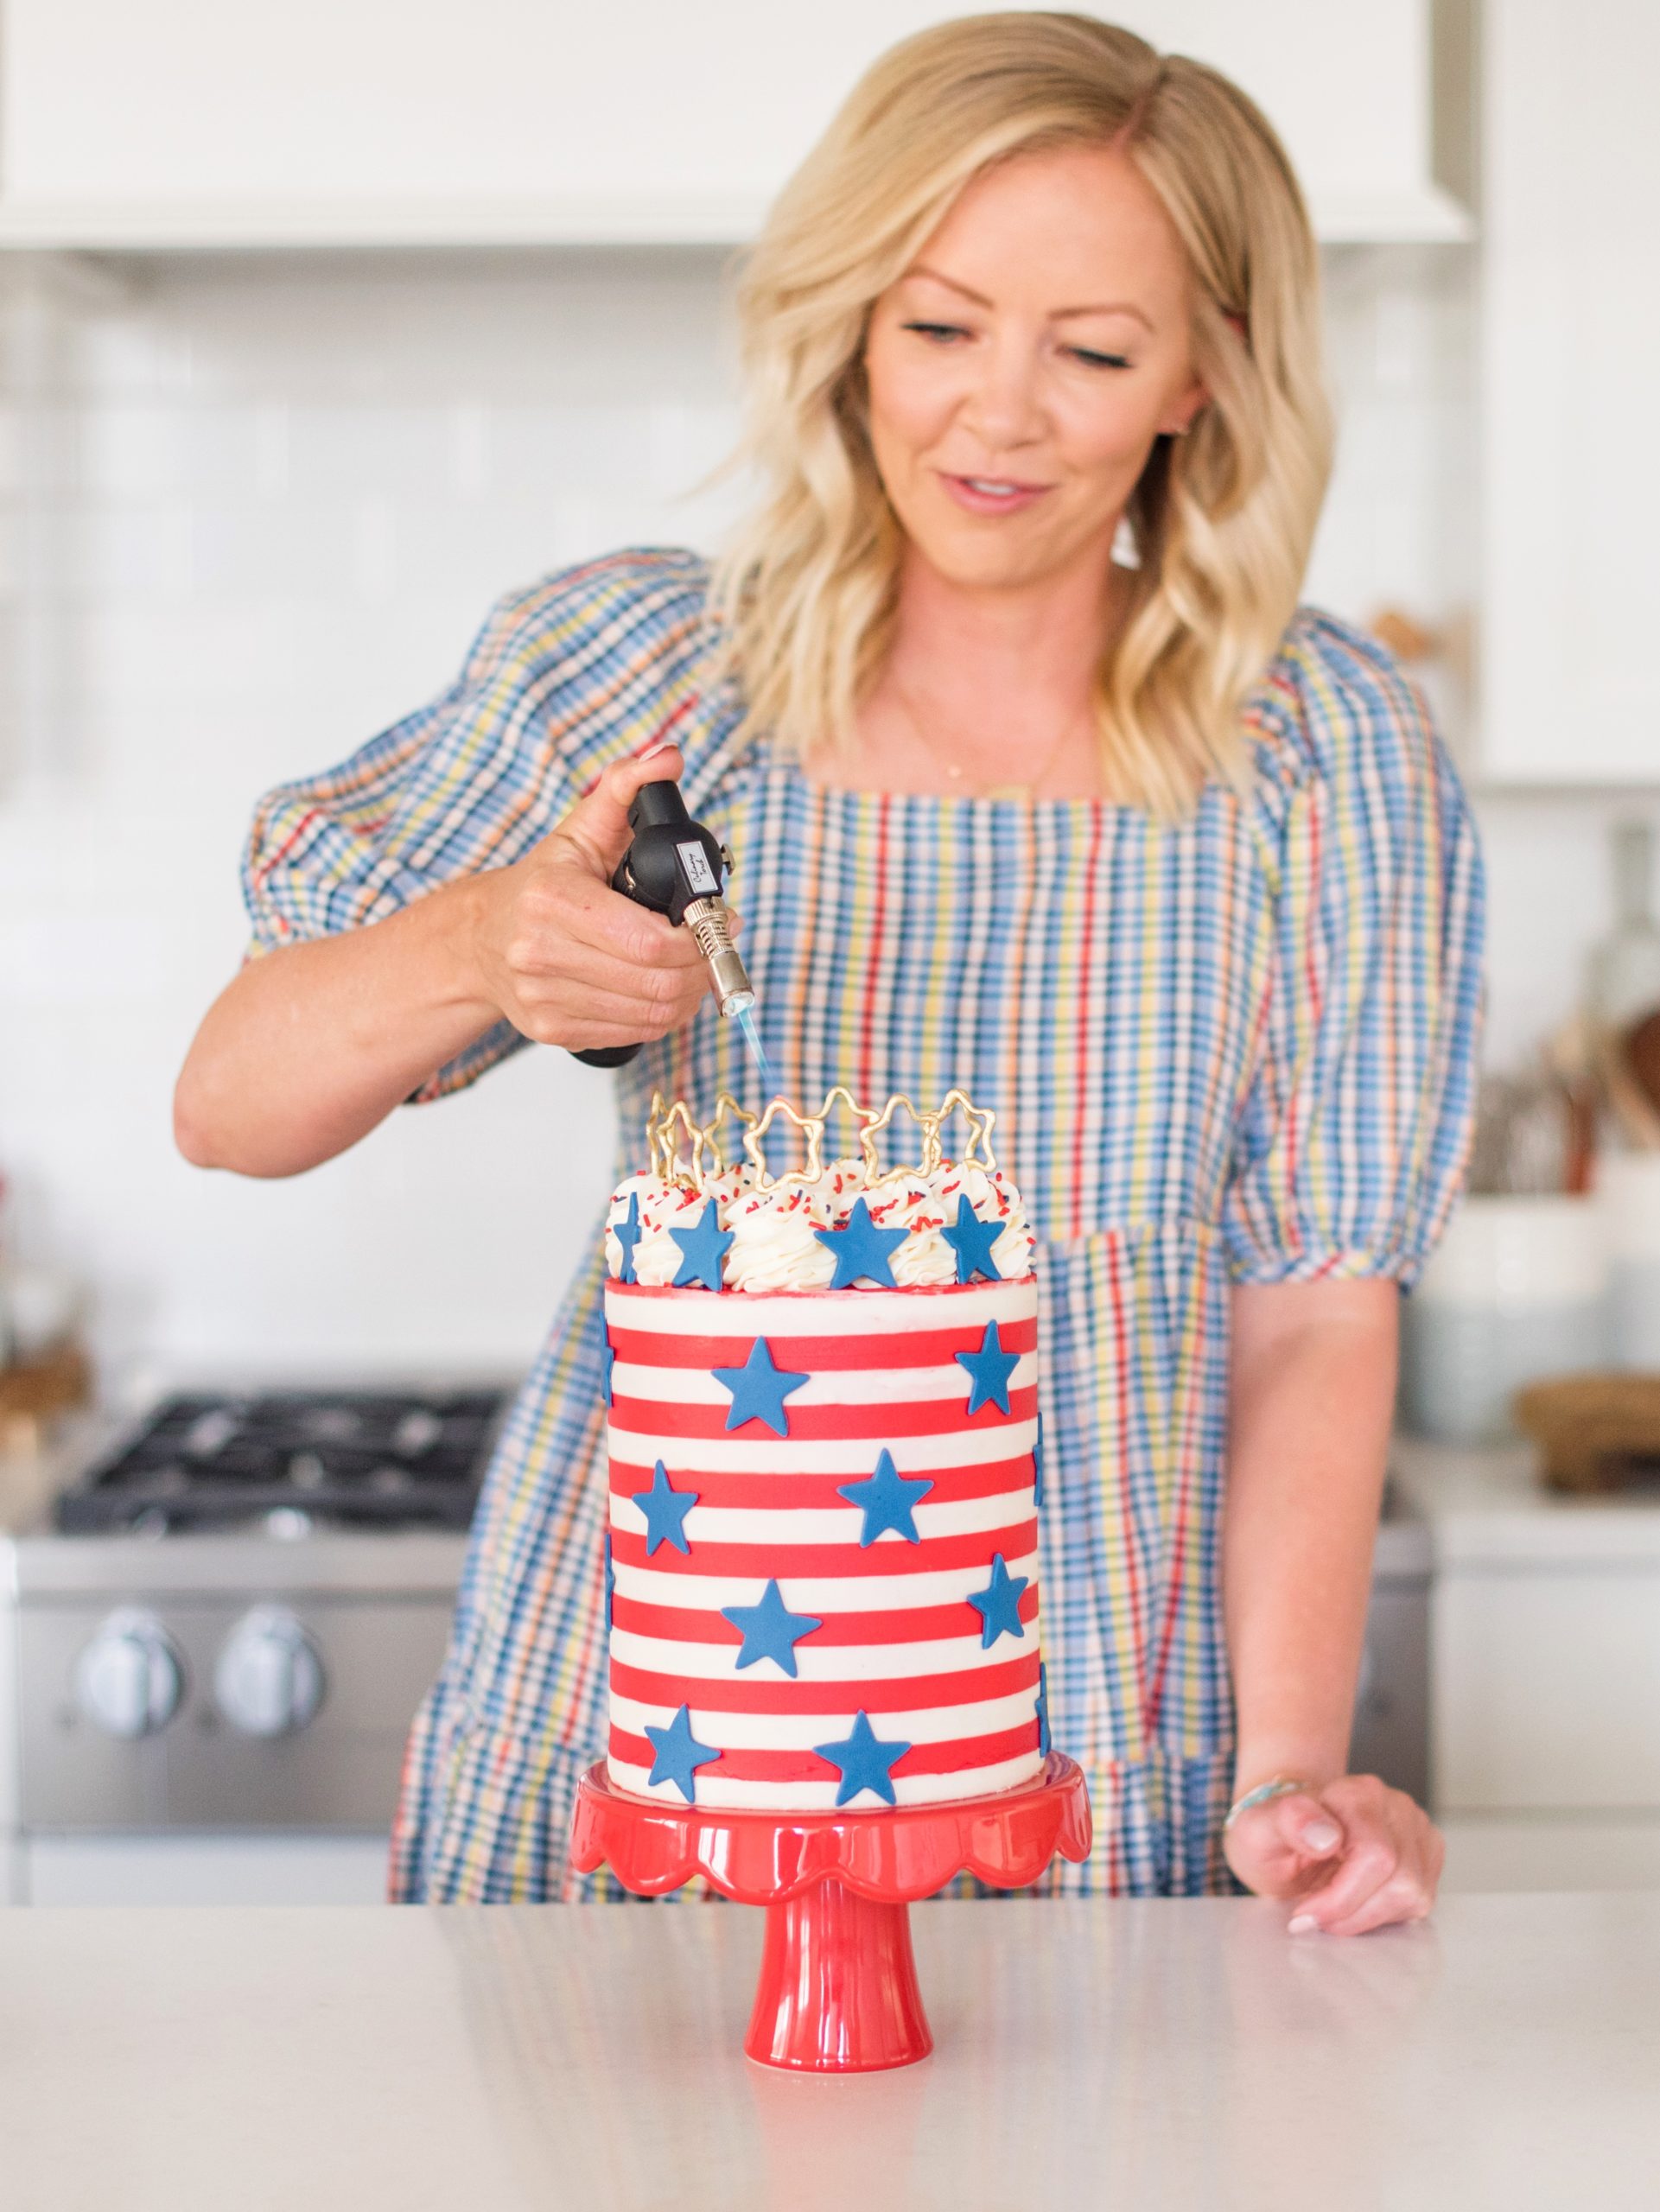 Sparkling Stars and Stripes 4th of July Cake - how to create buttercream stripes and this 4th of July Stars and Stripes cake. #cakebycourtney #4thofjuly #fourthofjuly #fourthofjulycake #fourthofjulydesserts #4thofjulycake #4thofjulydesserts #4thofjulycakeideas #redwhiteandbluecake #starsandstripescake #howtomakebuttercreamstripes #howtocakeit